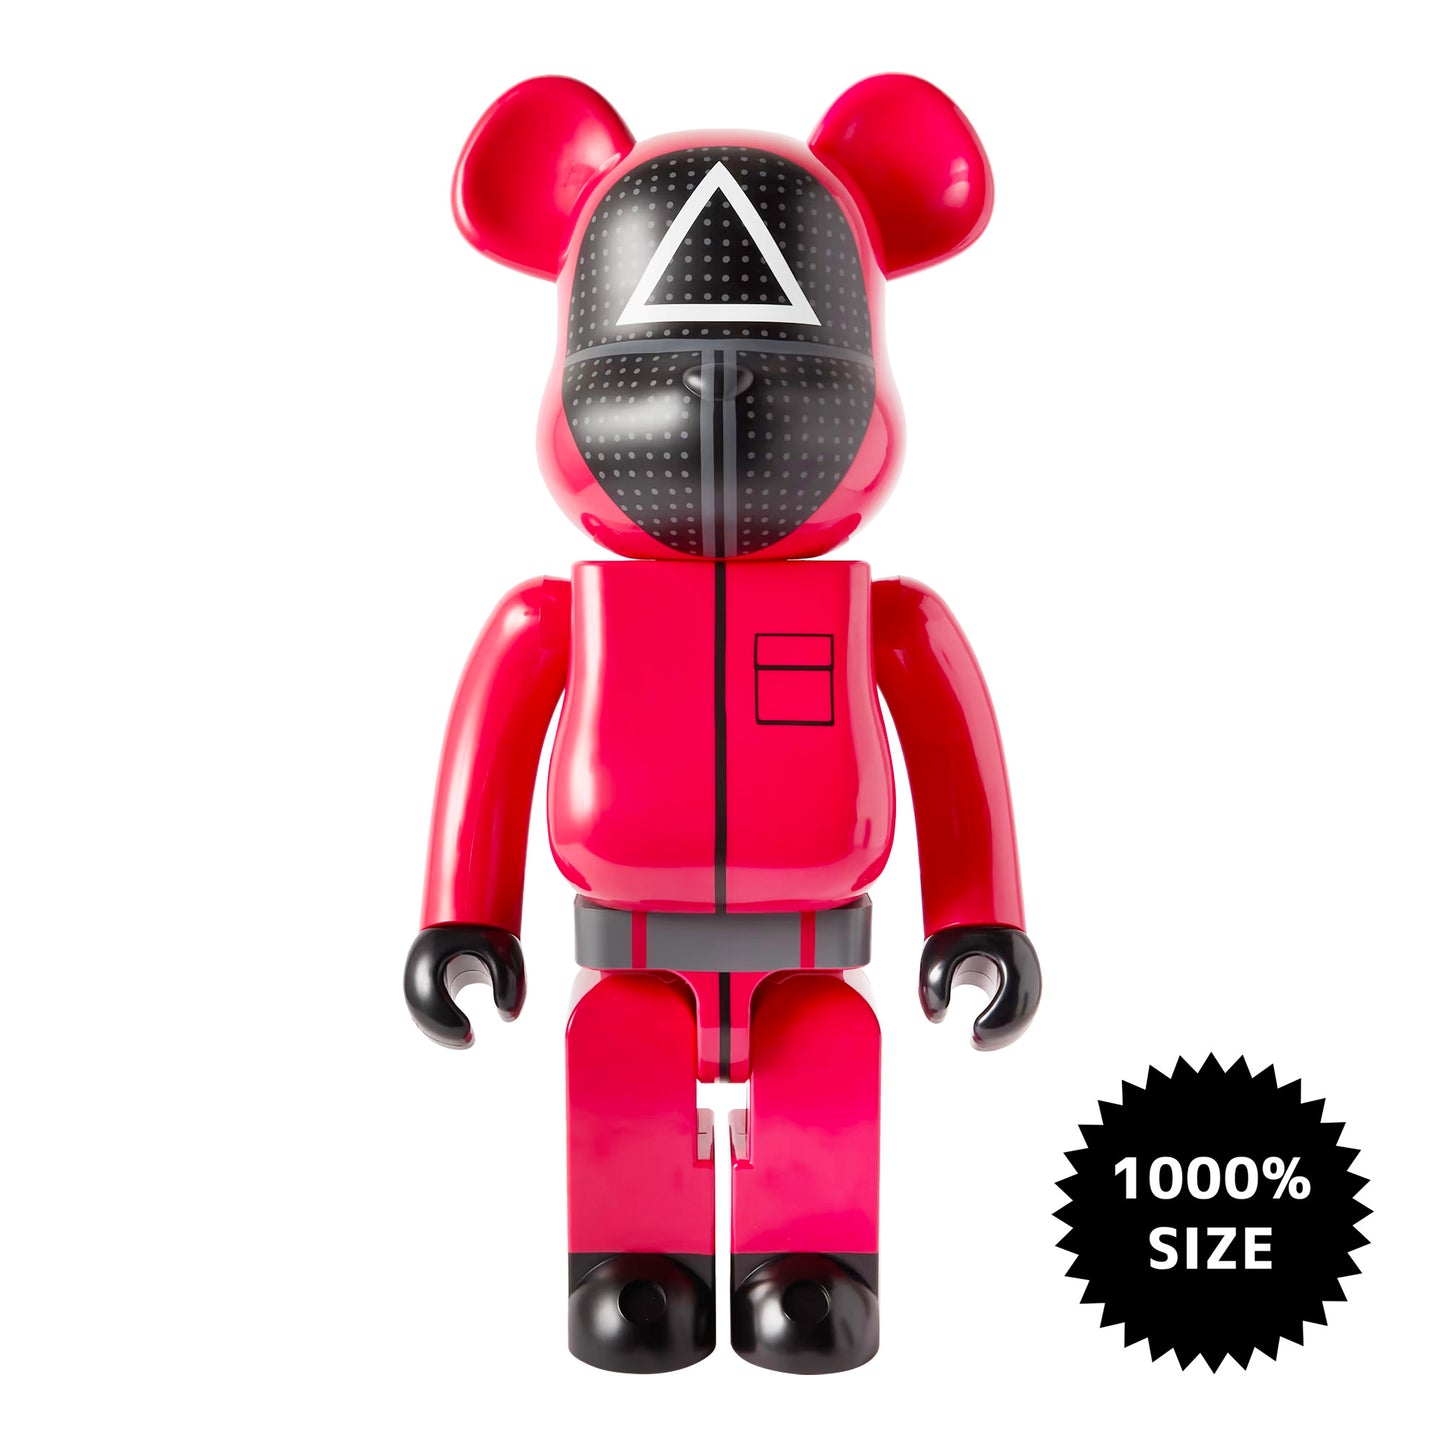 MEDICOM TOY: BE@RBRICK - Squid Game TRIANGLE Guard 1000%